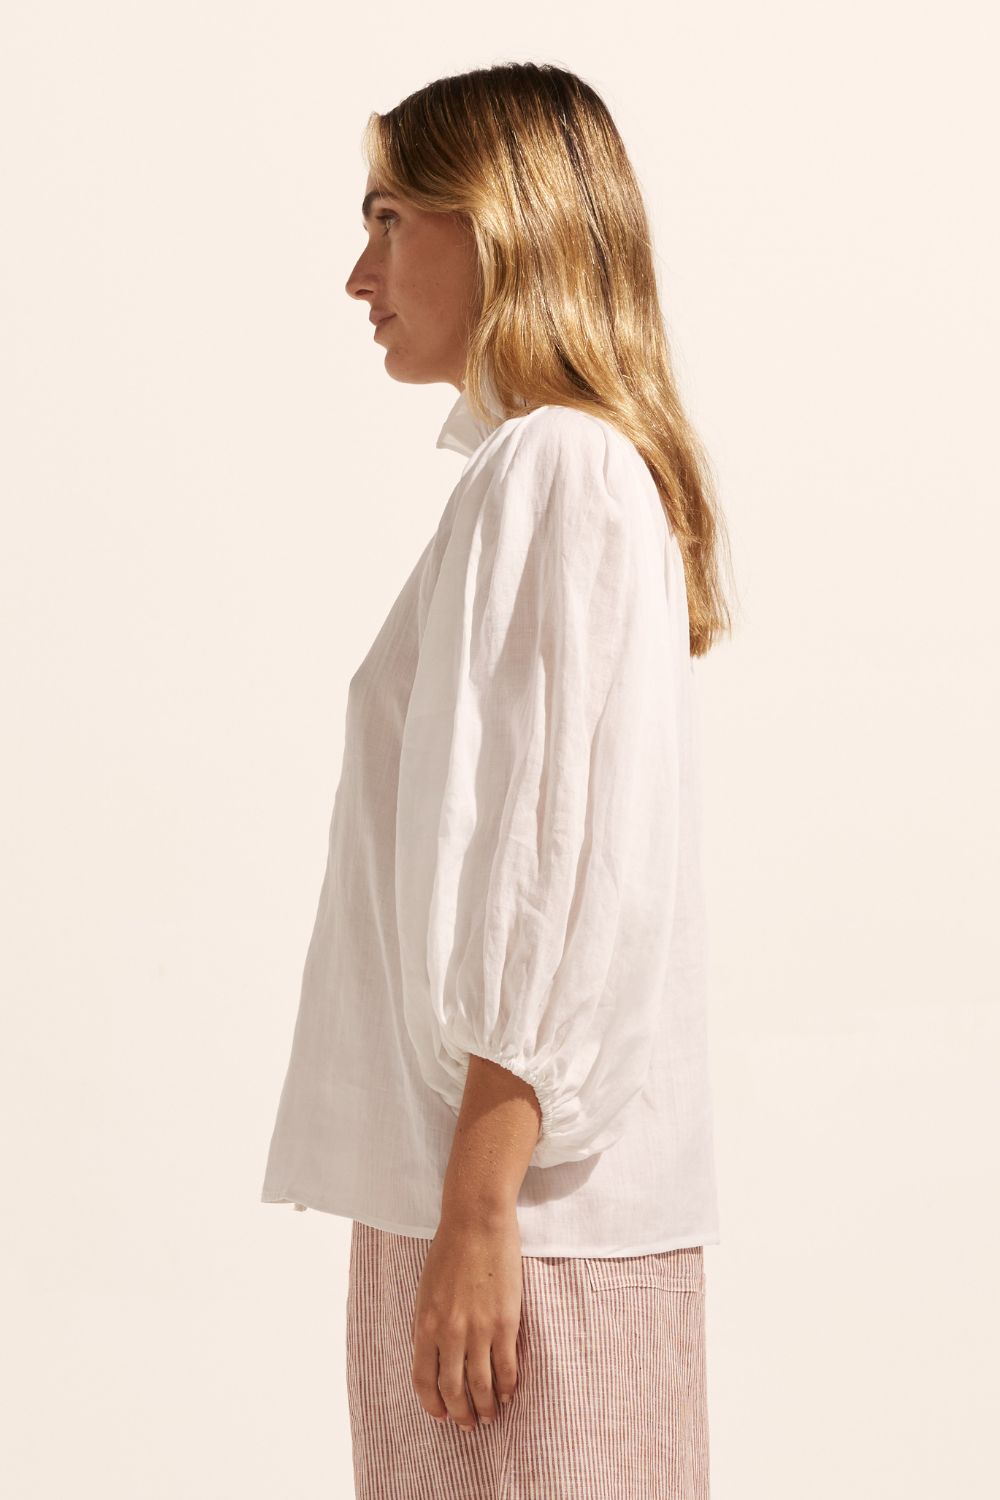 white, ruffle neck collar, buttons down centre, mid length sleeve, shirt, side view